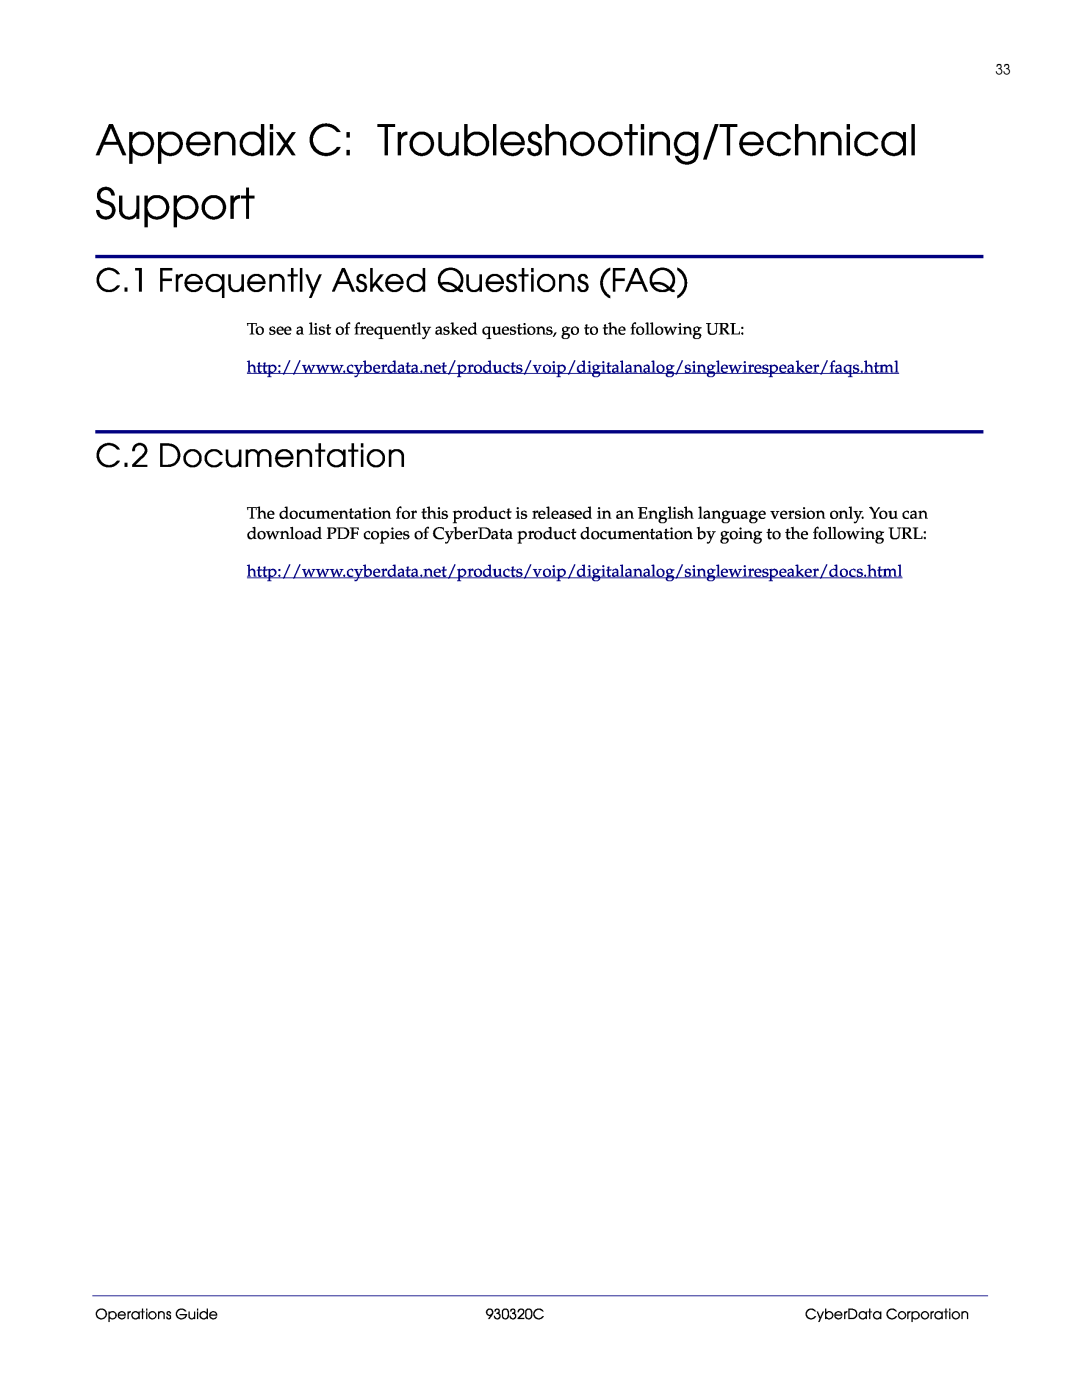 CyberData 11103 manual Appendix C: Troubleshooting/Technical Support, C.1 Frequently Asked Questions FAQ, C.2 Documentation 